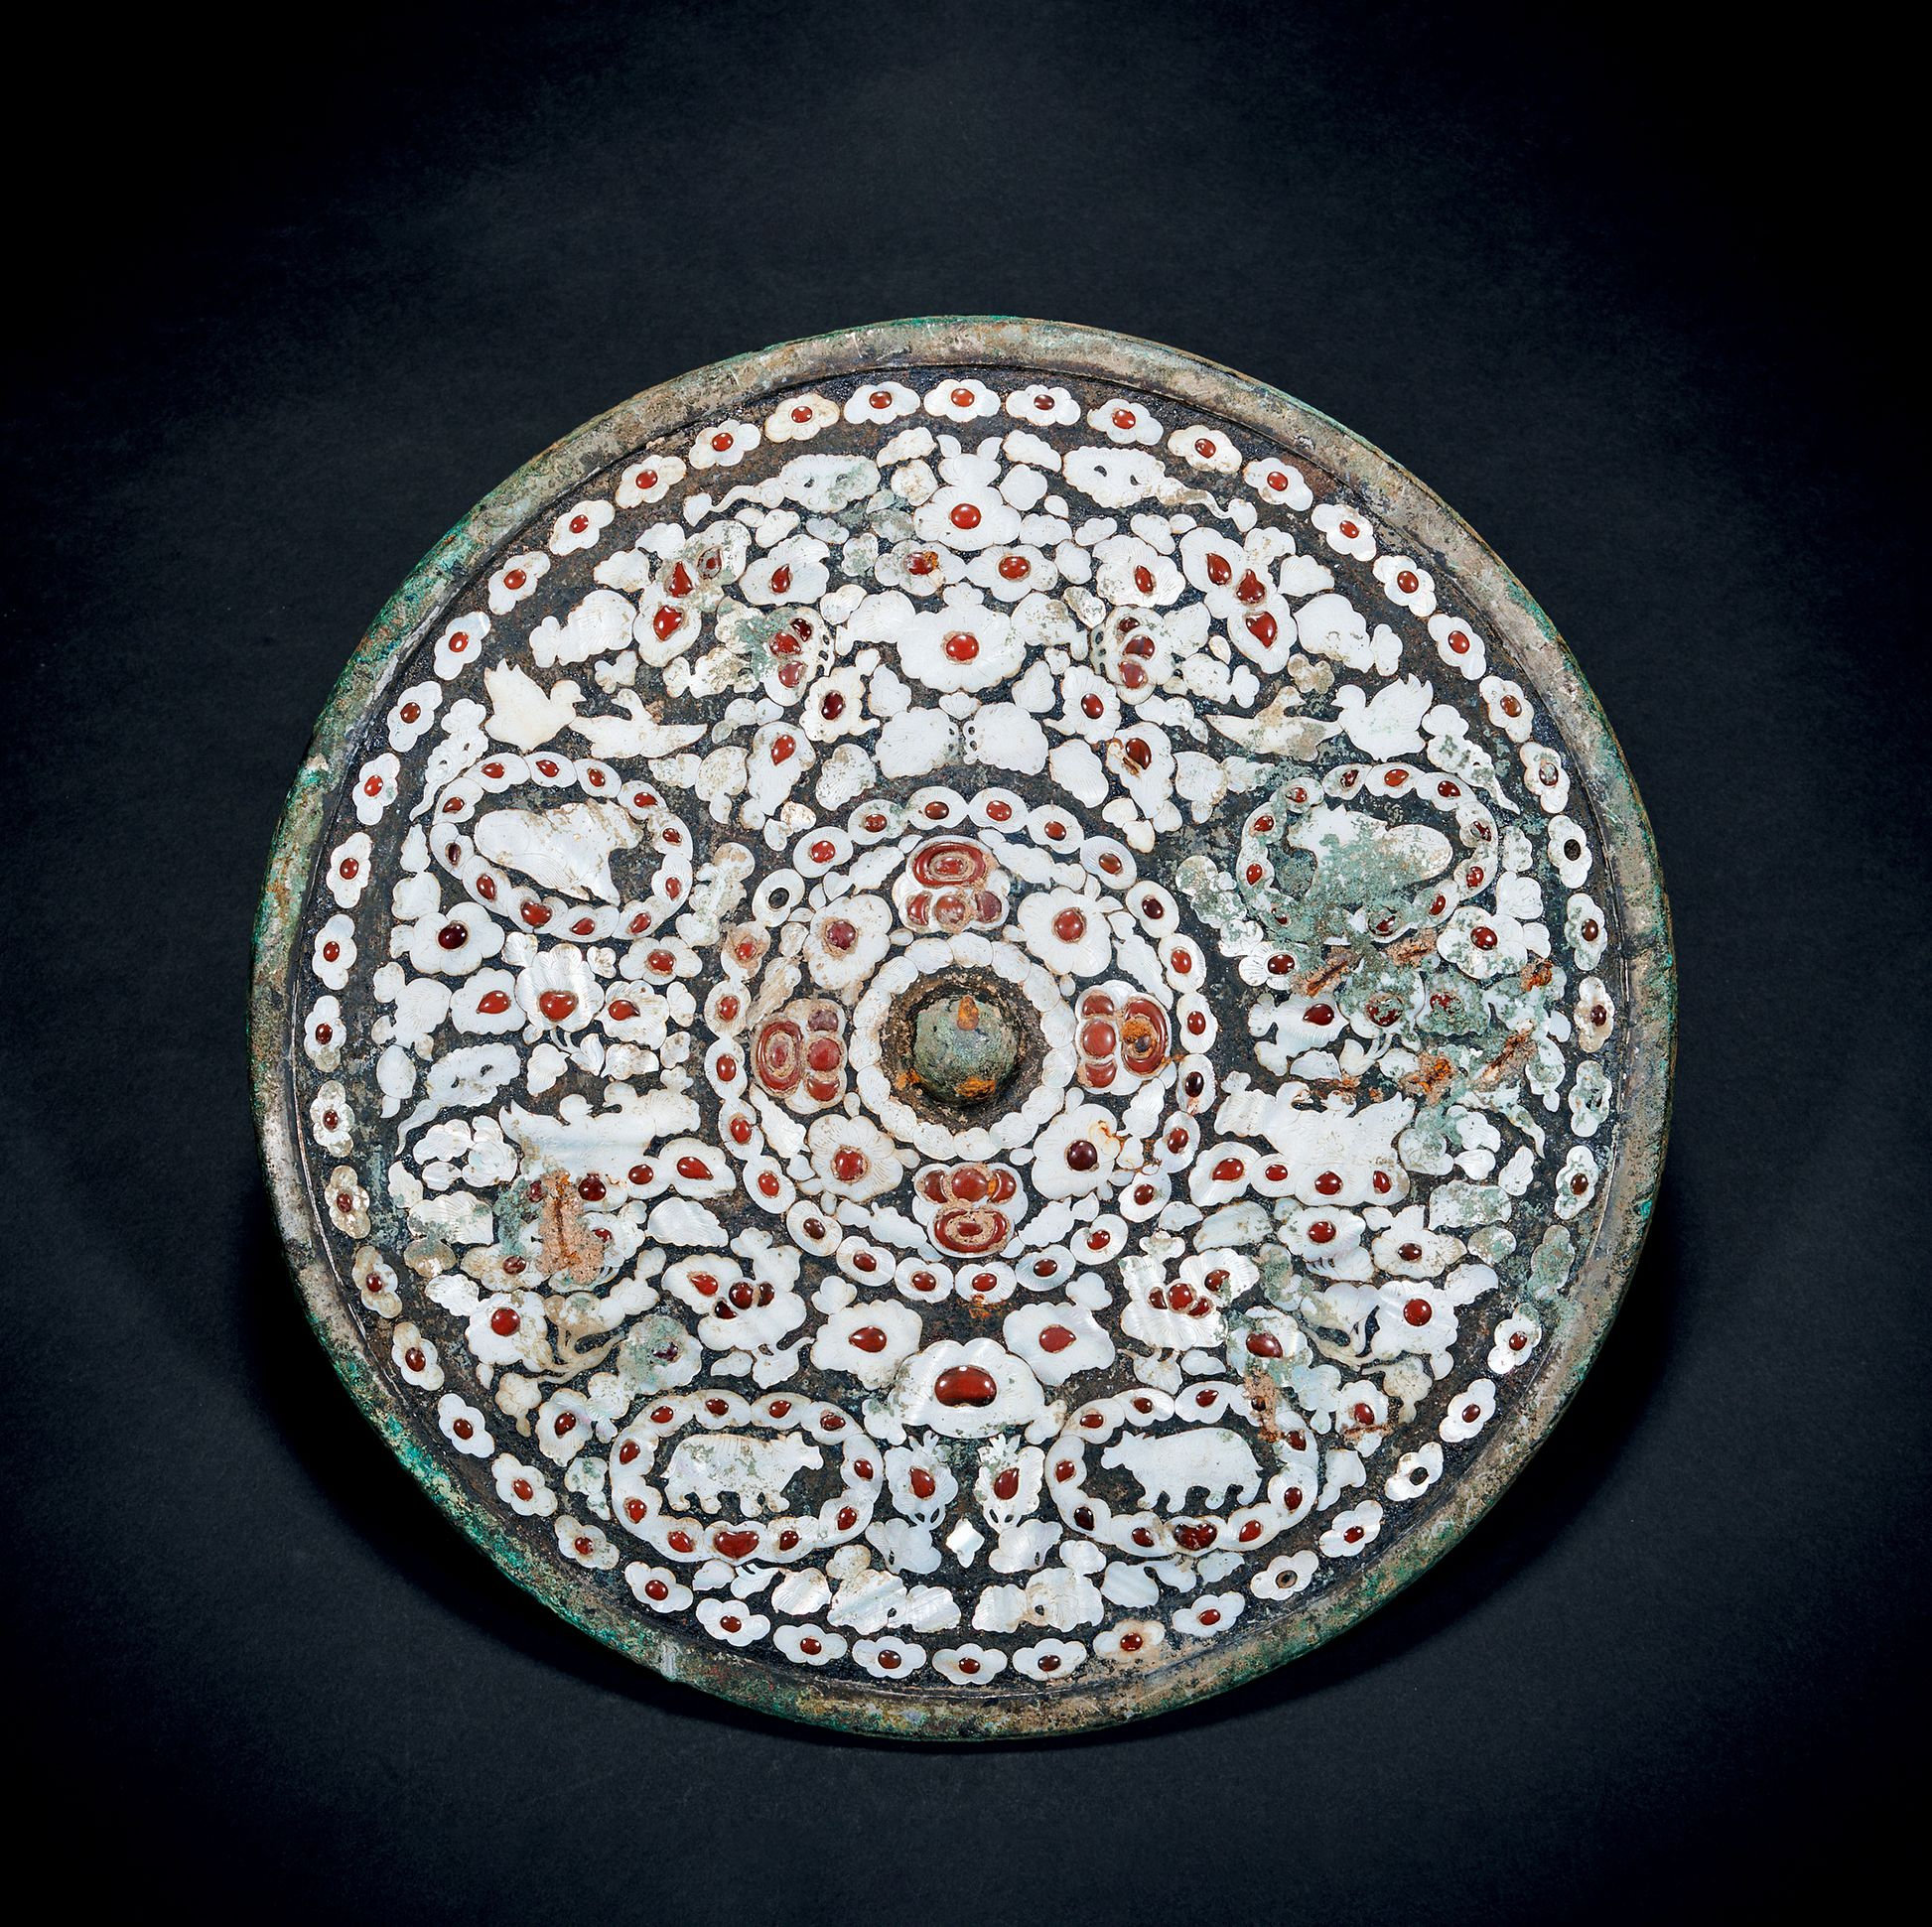 A bronze mother-of-pearl-inlaid mirror, Tang dynasty (618-907)